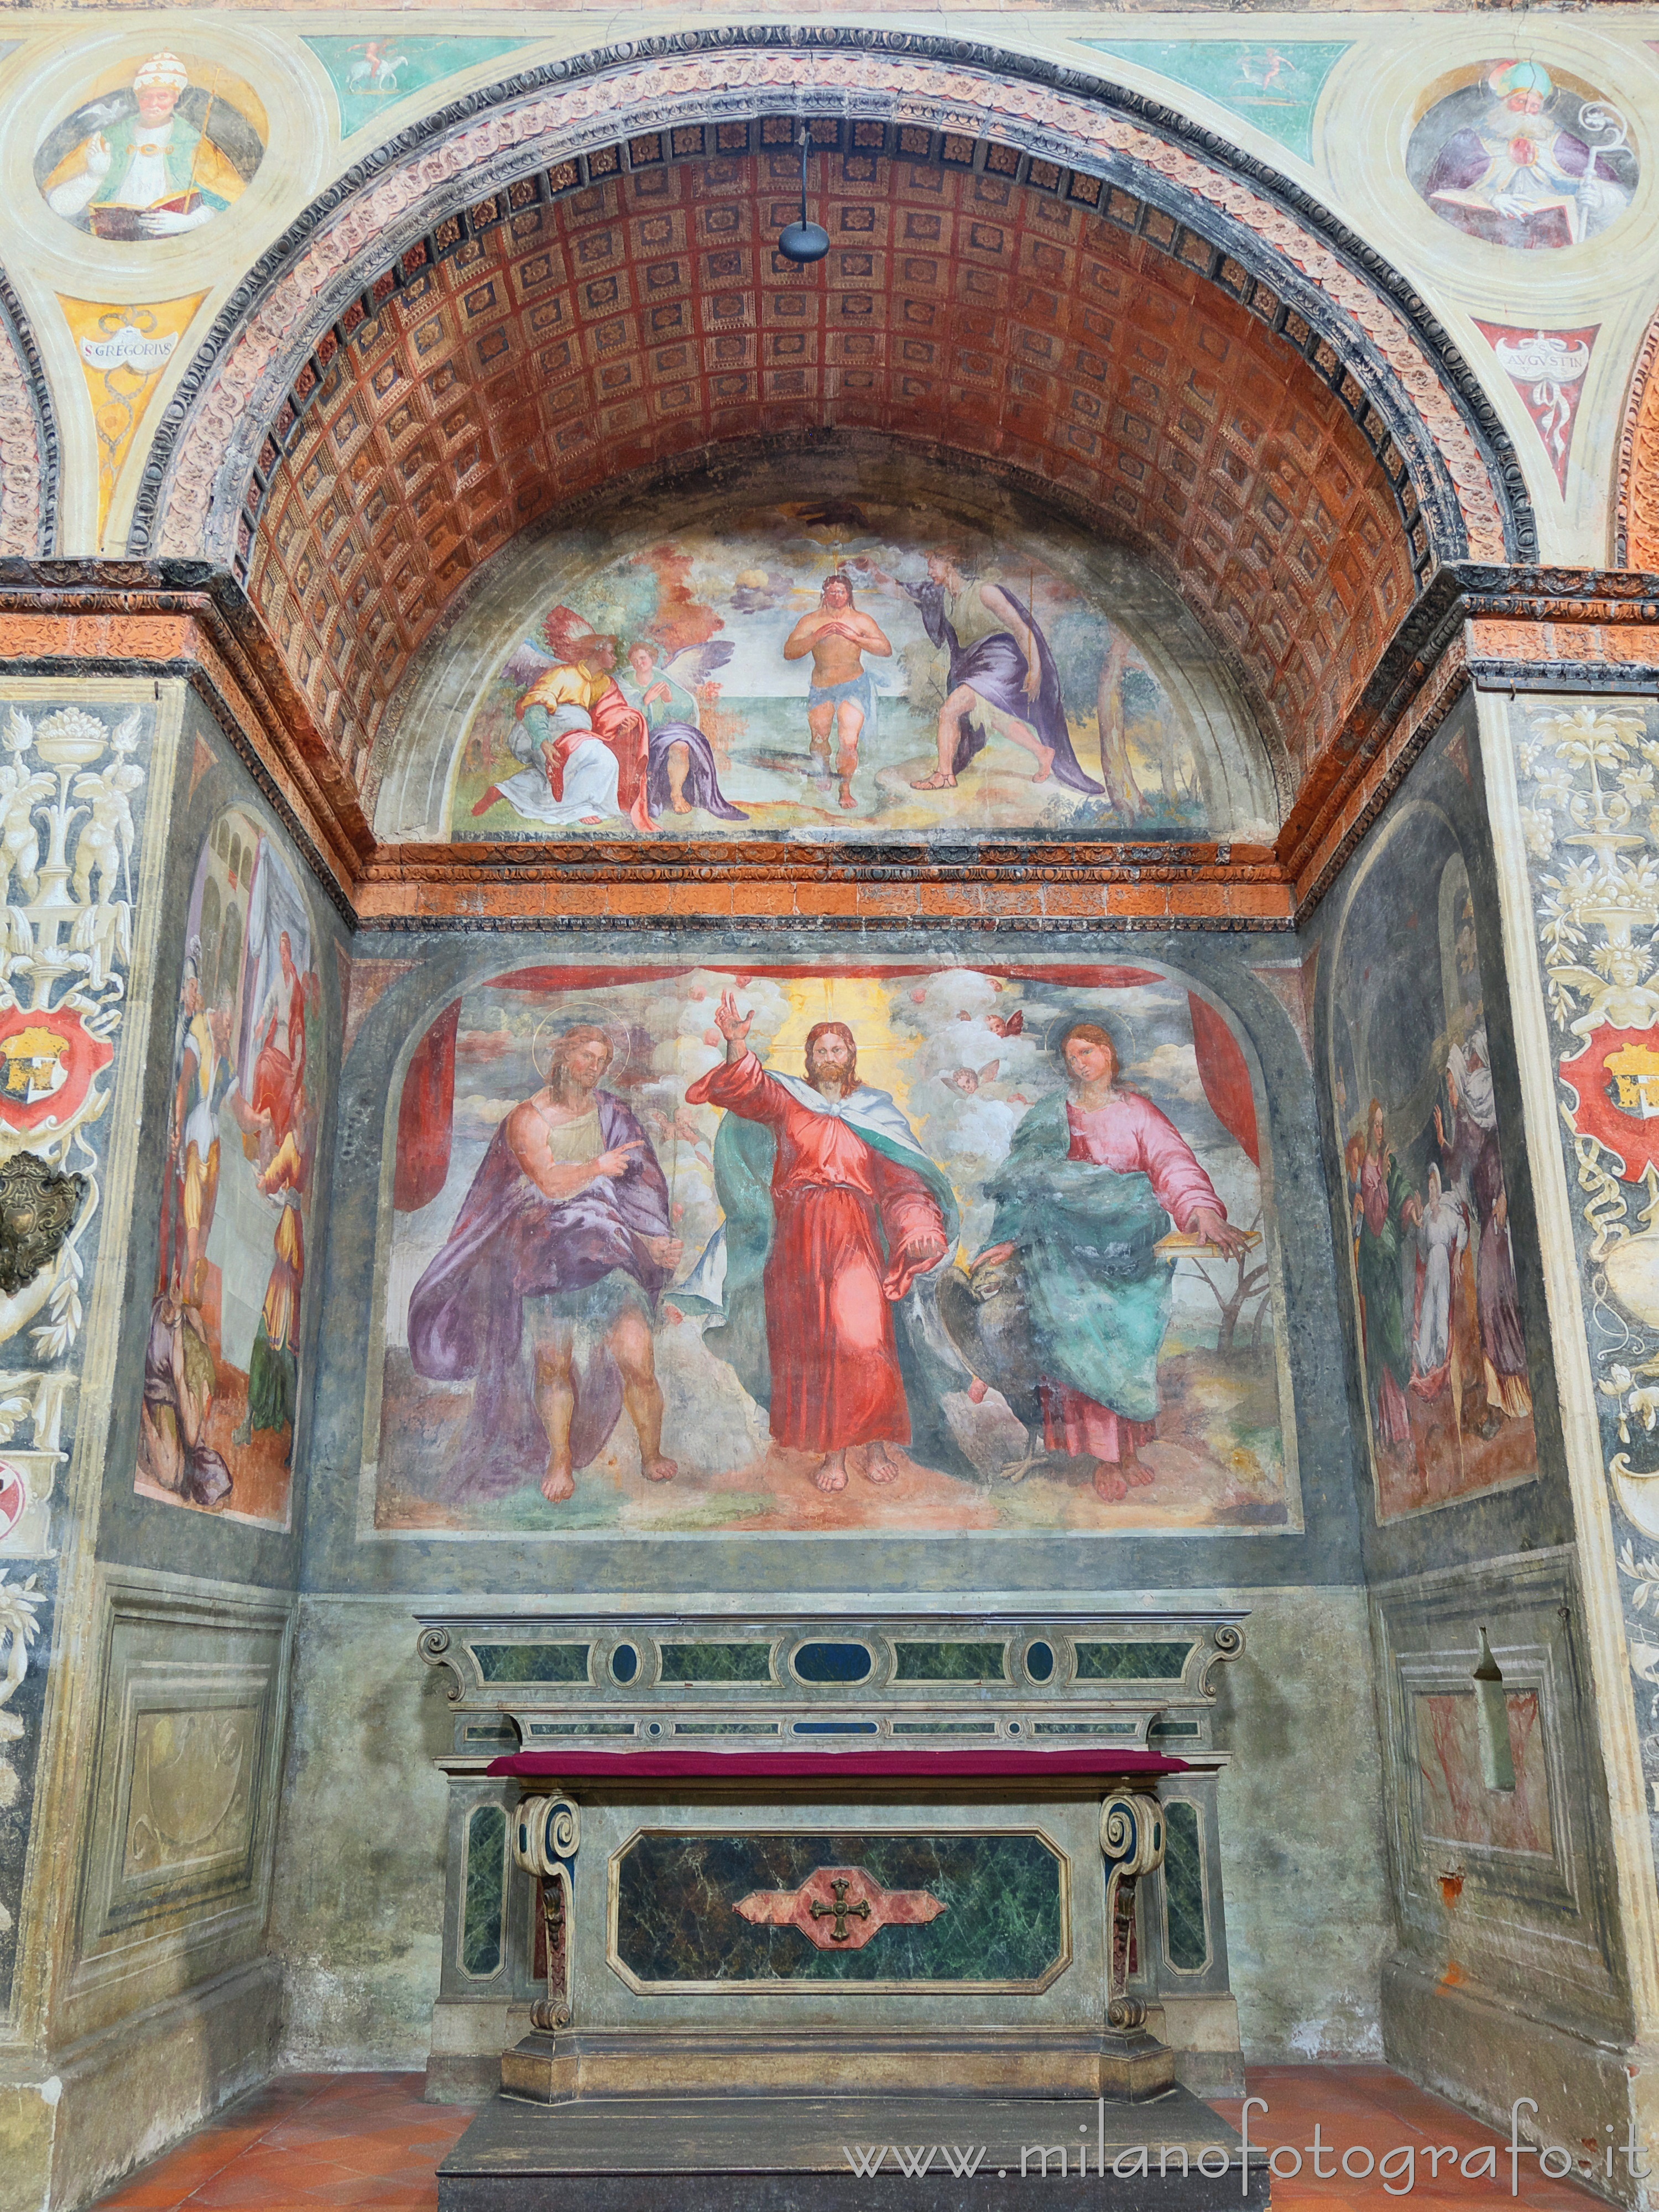 Soncino (Cremona, Italy): Chapel of the Saints John the Baptist and Evangelist in the Church of Santa Maria delle Grazie - Soncino (Cremona, Italy)